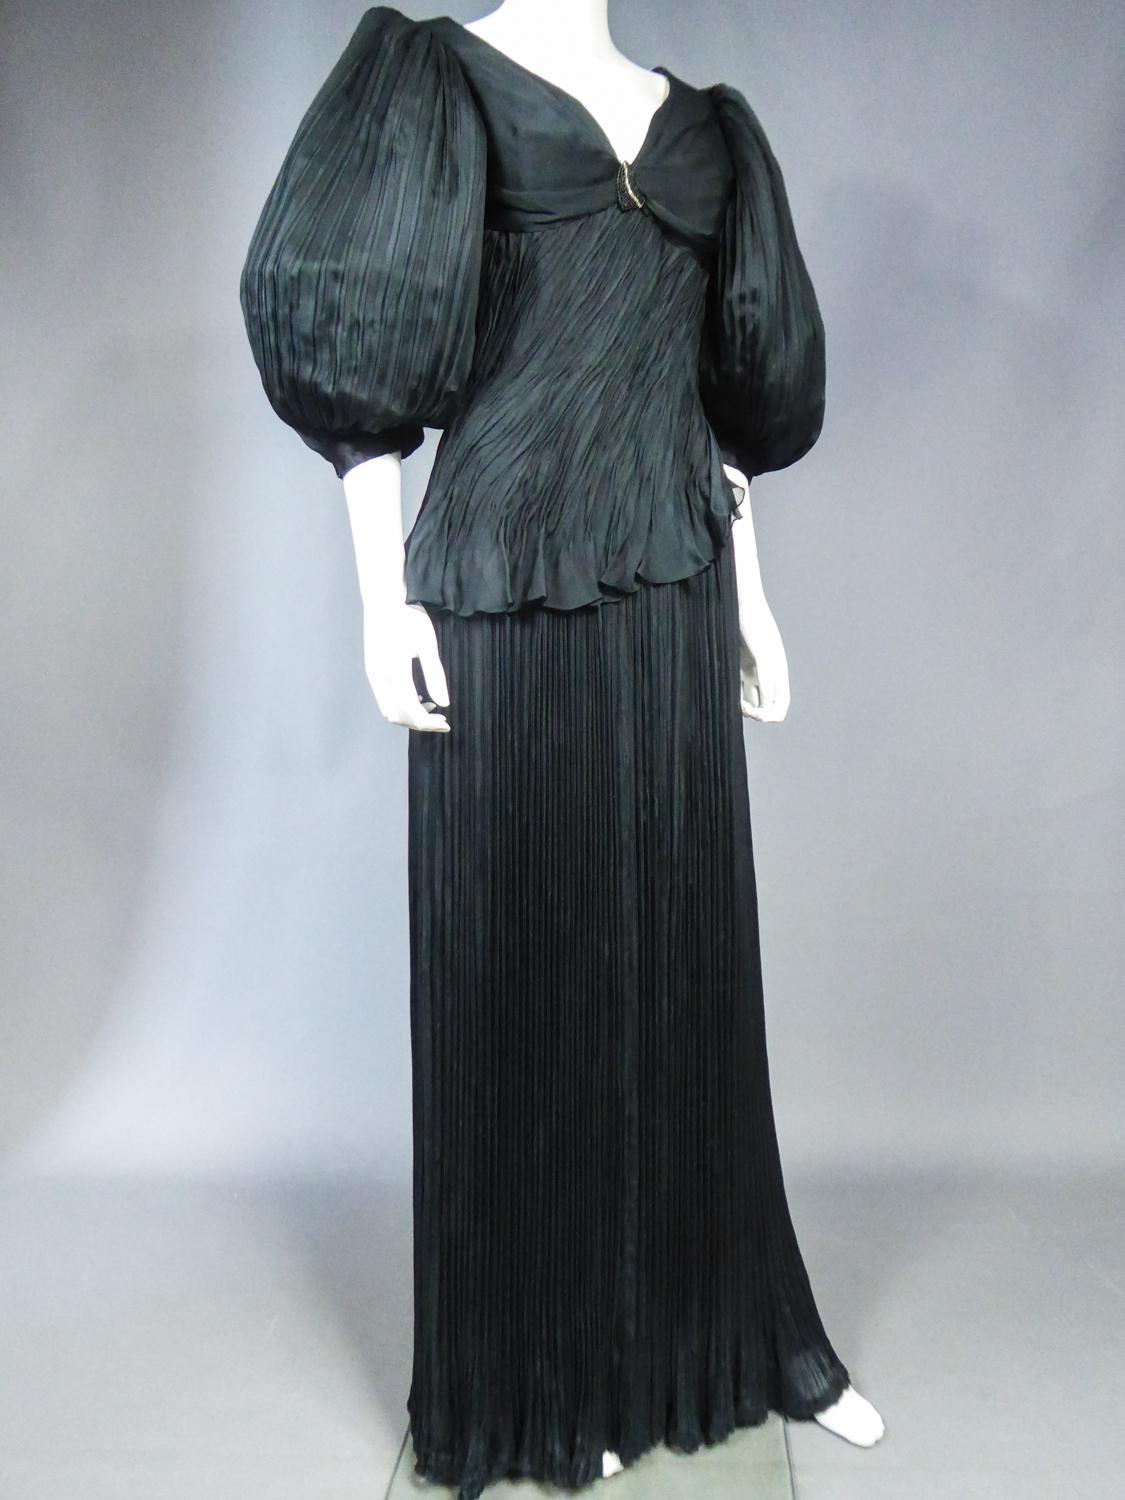 An Emanuel Ungaro French Evening Dress Numbered 295-5-85 Circa 1985/1990 For Sale 5